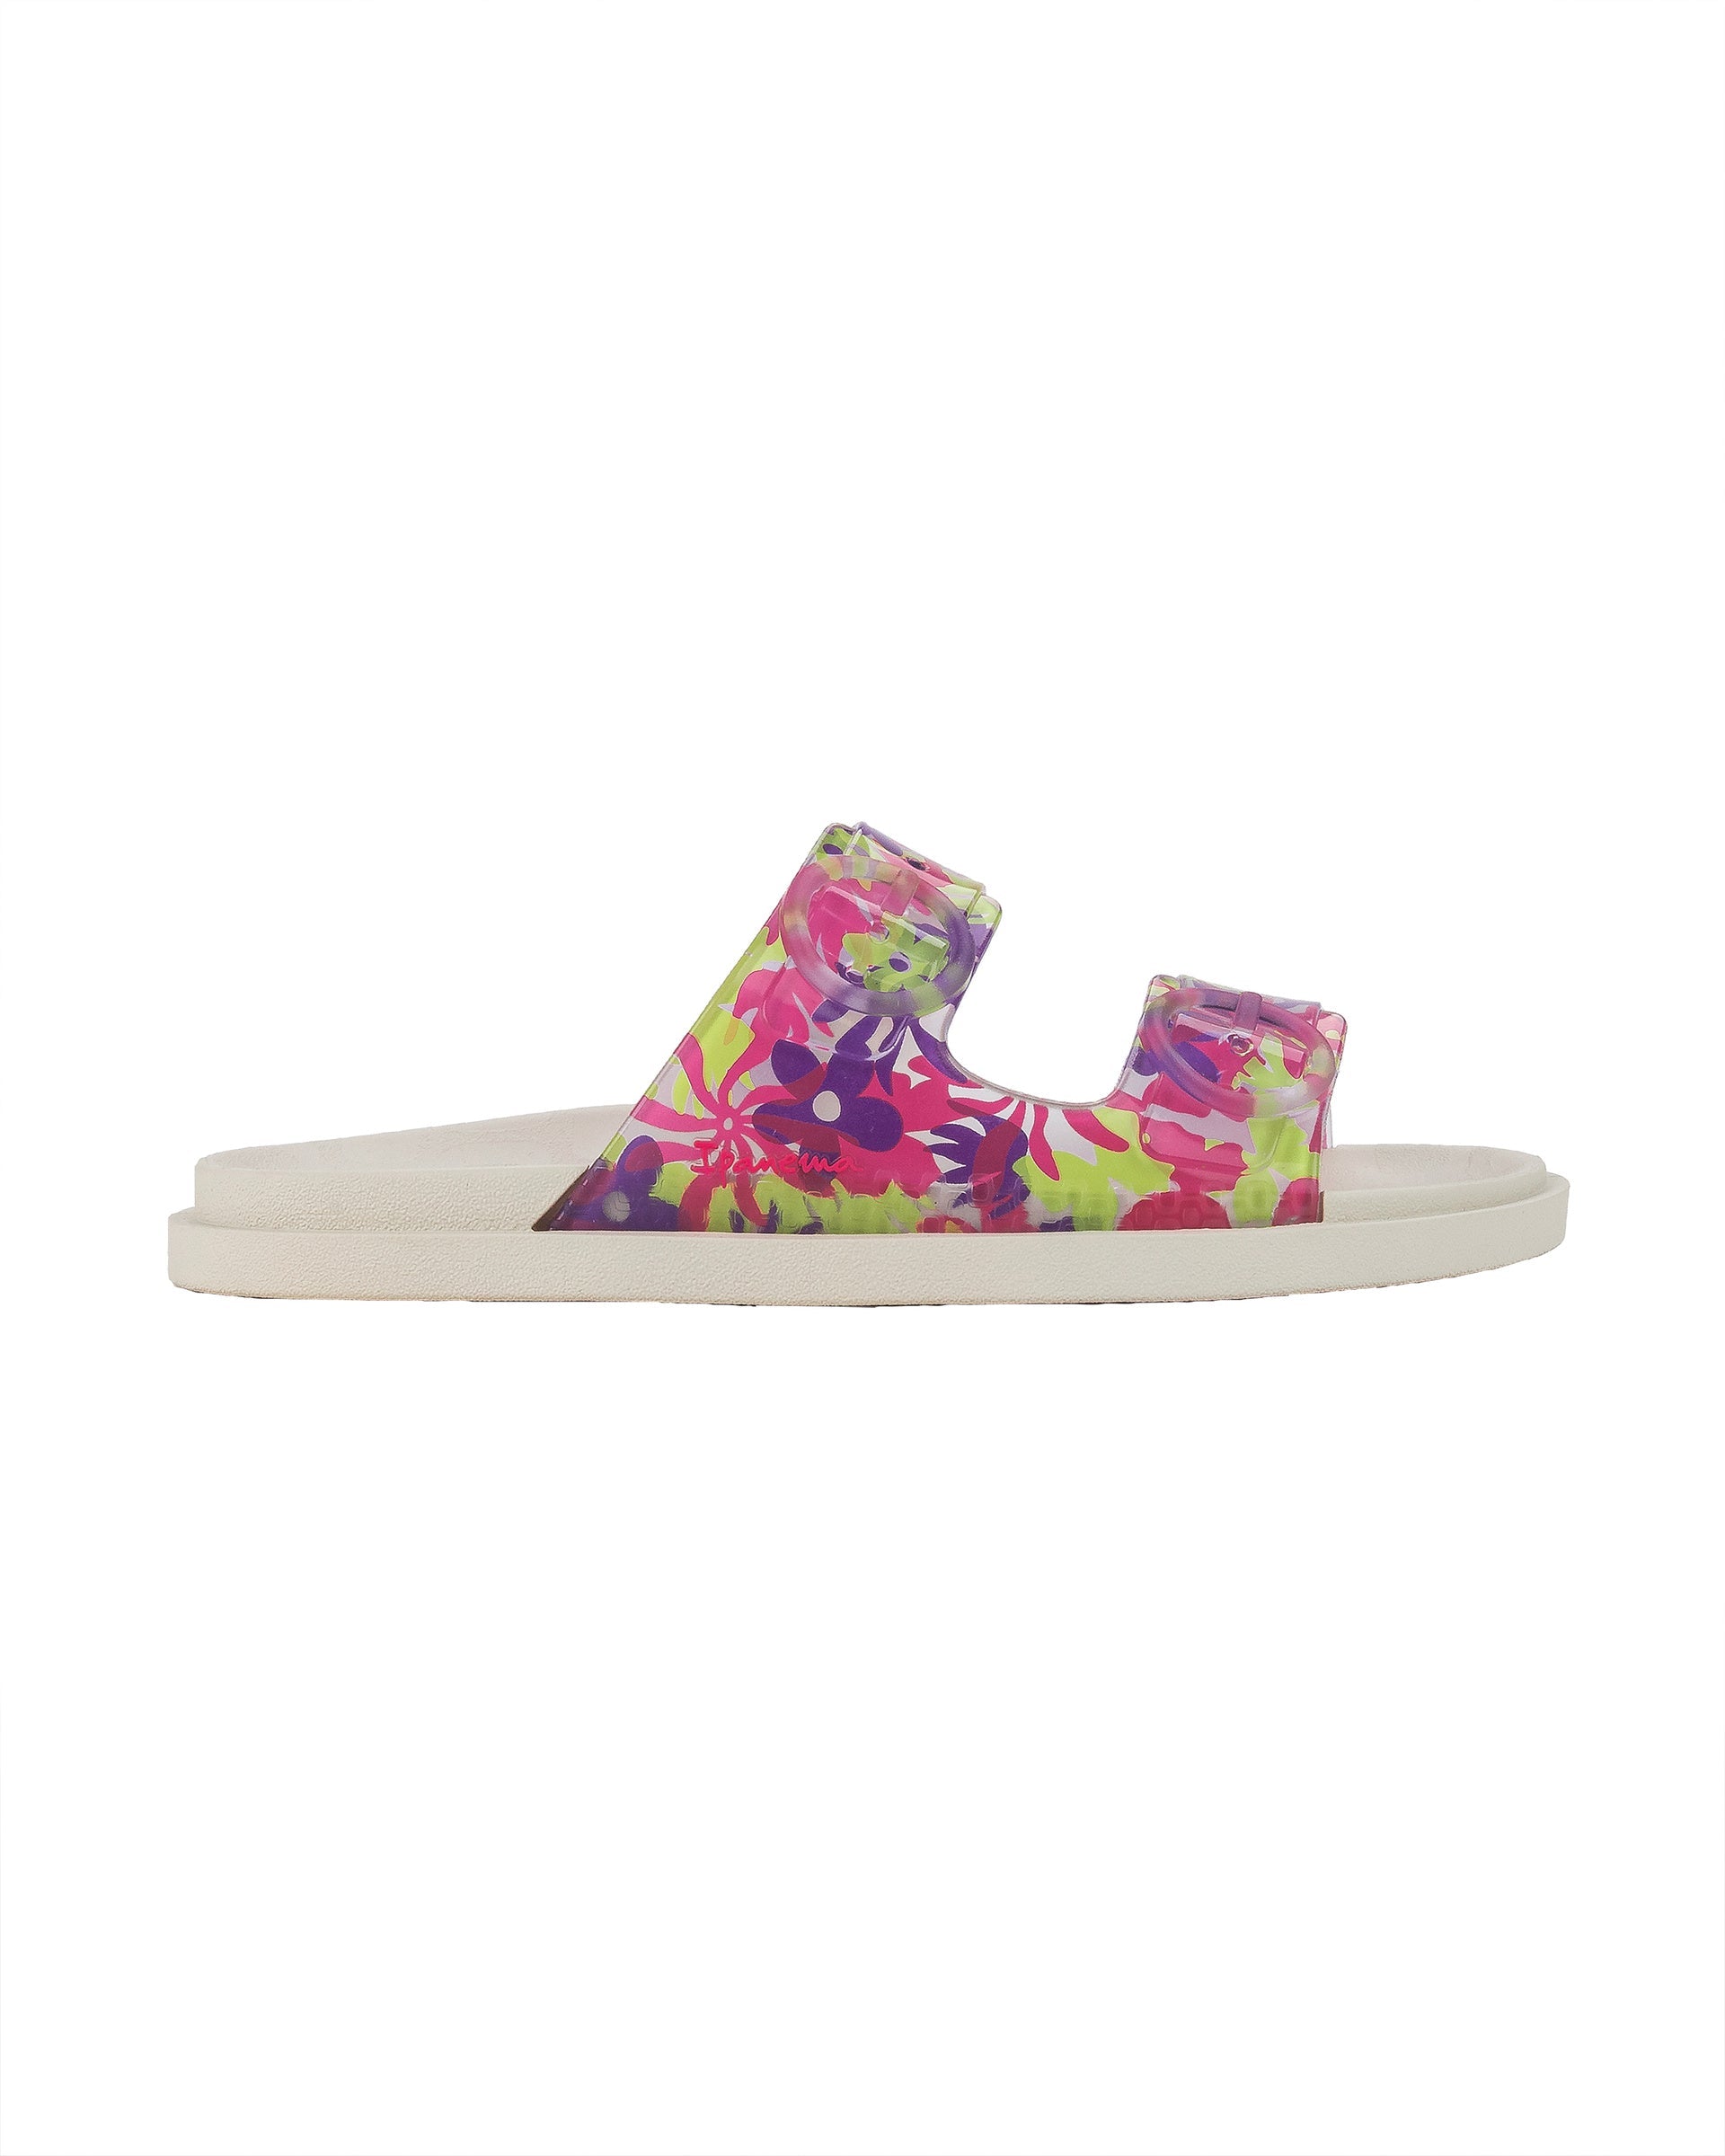 Outer side view of a beige Ipanema Follow kids slide with floral print on the upper.